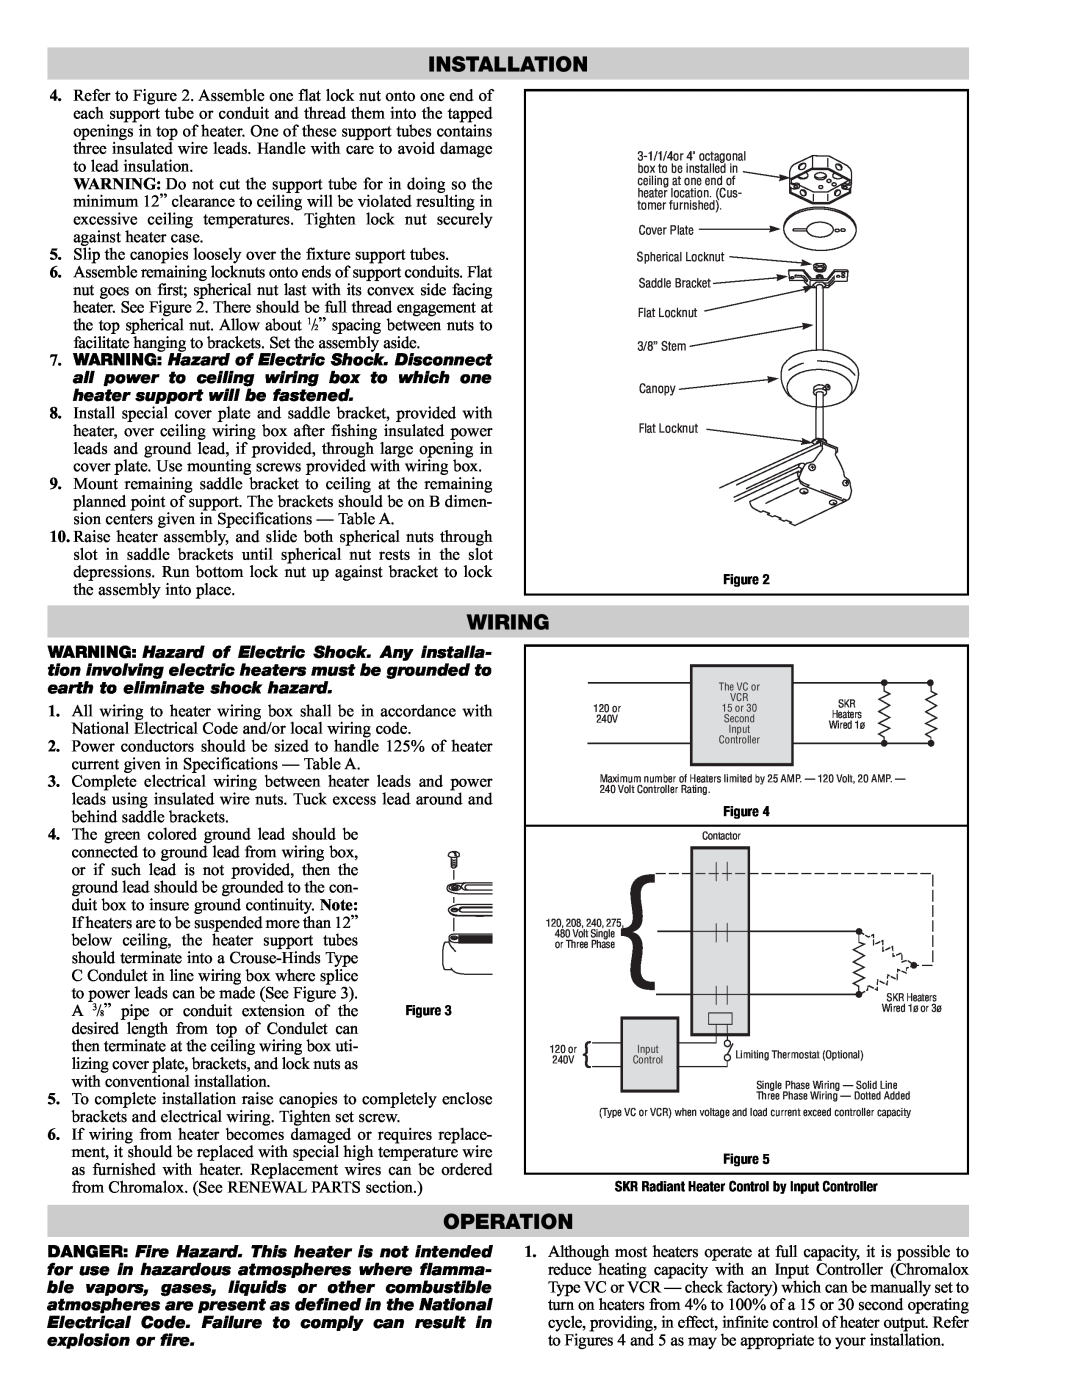 Chromalox PG417-3 specifications Wiring, Operation, Installation 